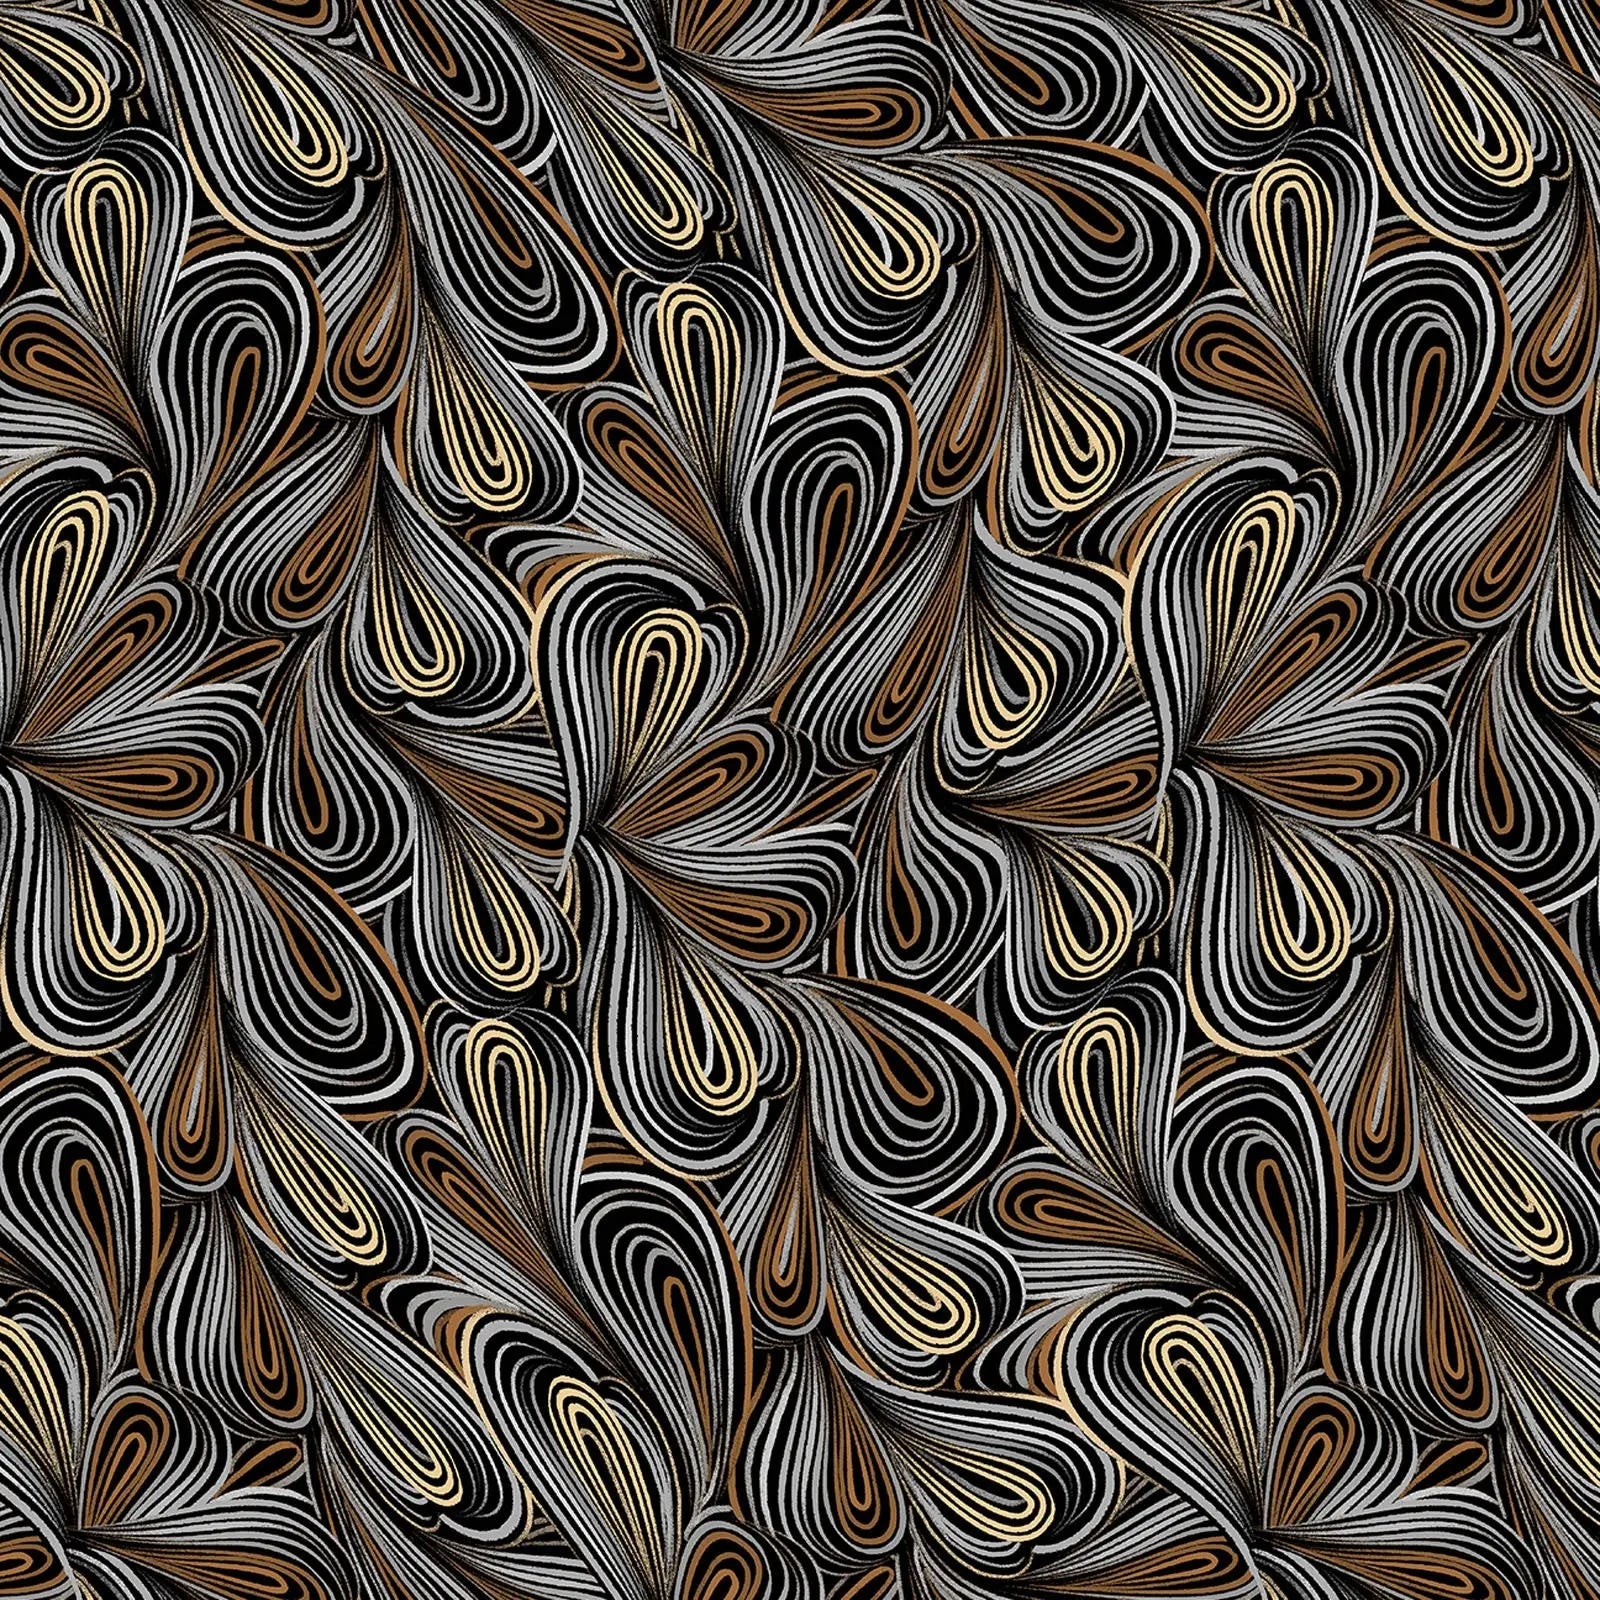 Multi color modern swirl wideback fabric. Colors consist of cream, grey, white and brown on a dark background. 